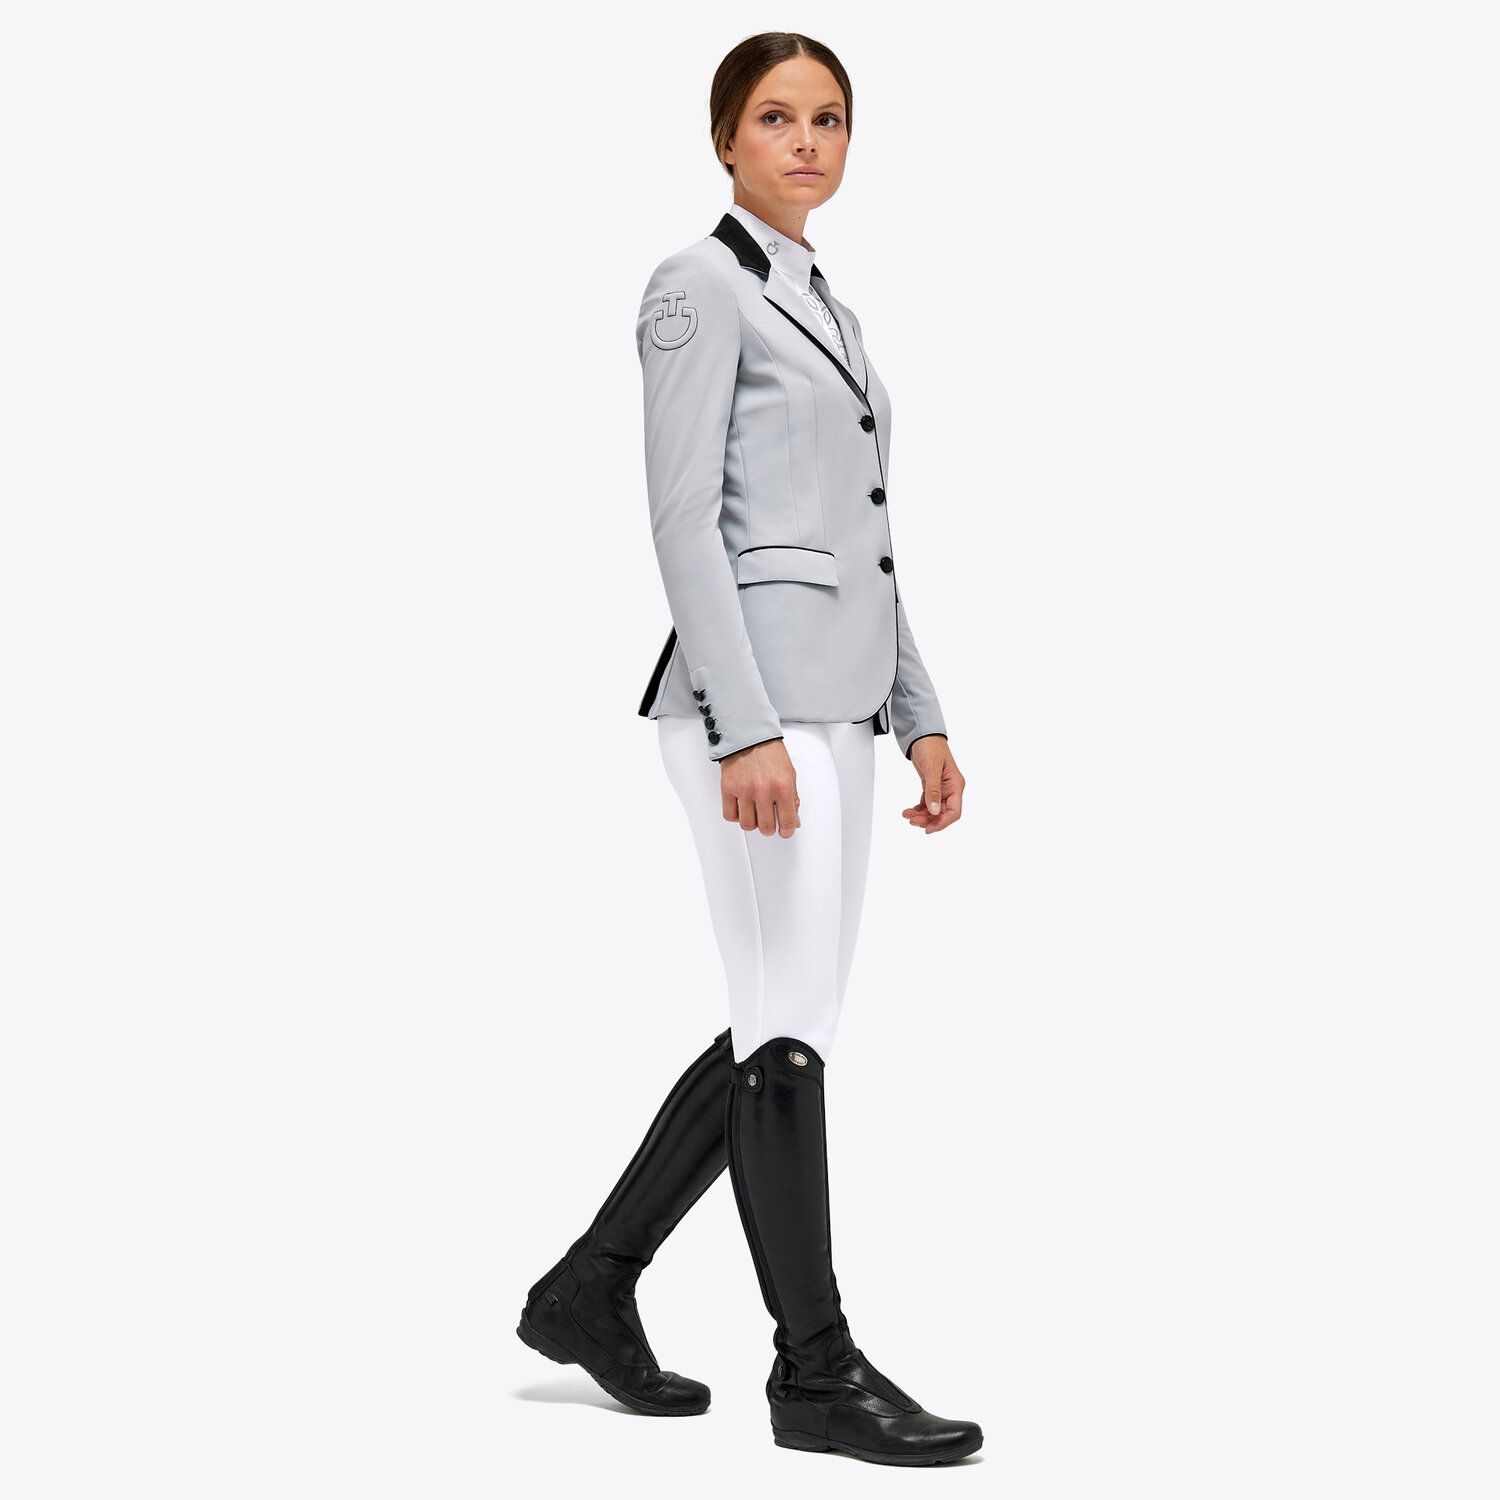 Cavalleria Toscana Women's competition riding jacket. LIGHT GREY-3